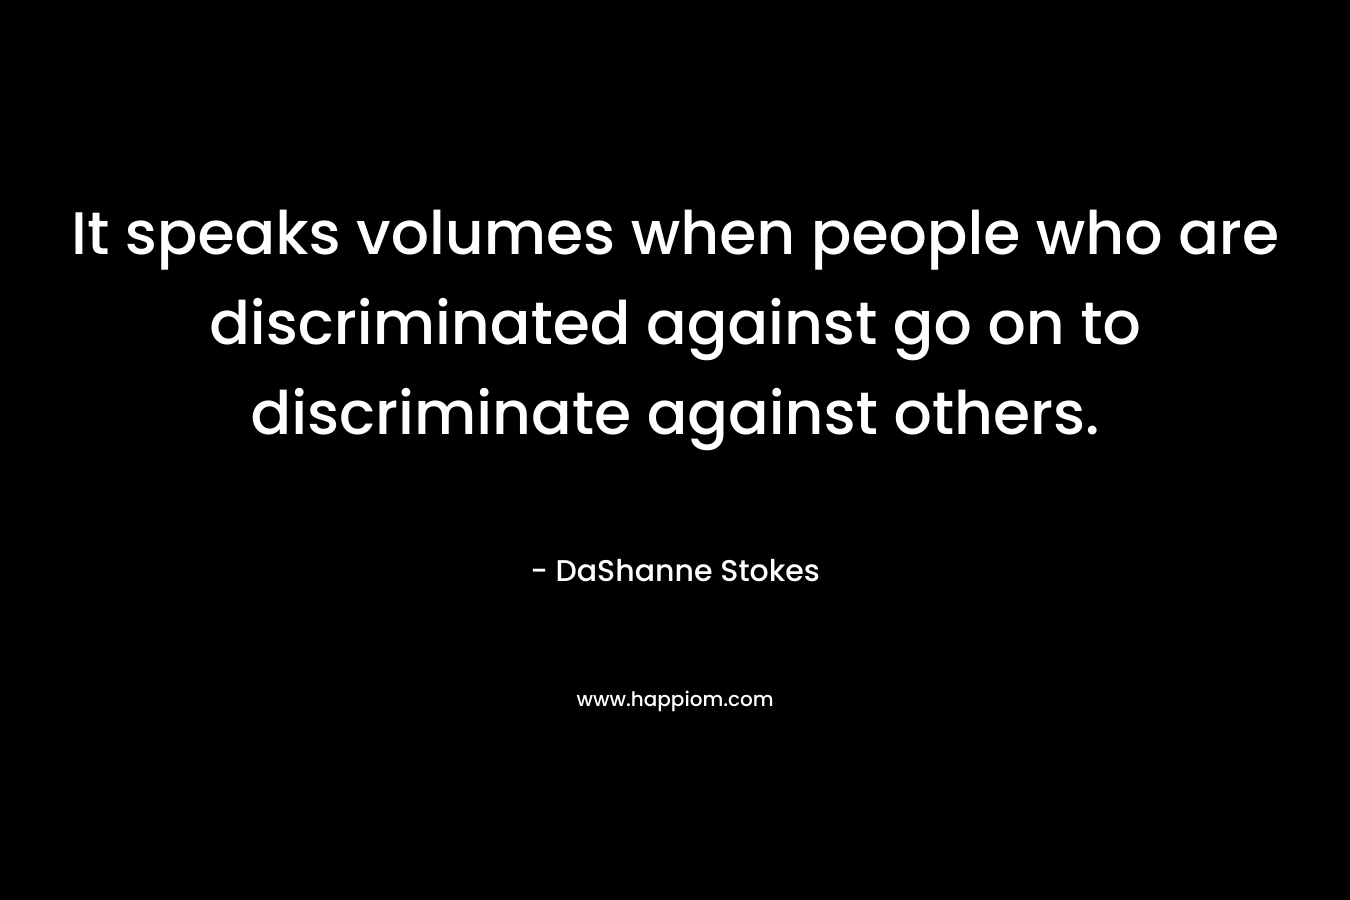 It speaks volumes when people who are discriminated against go on to discriminate against others.